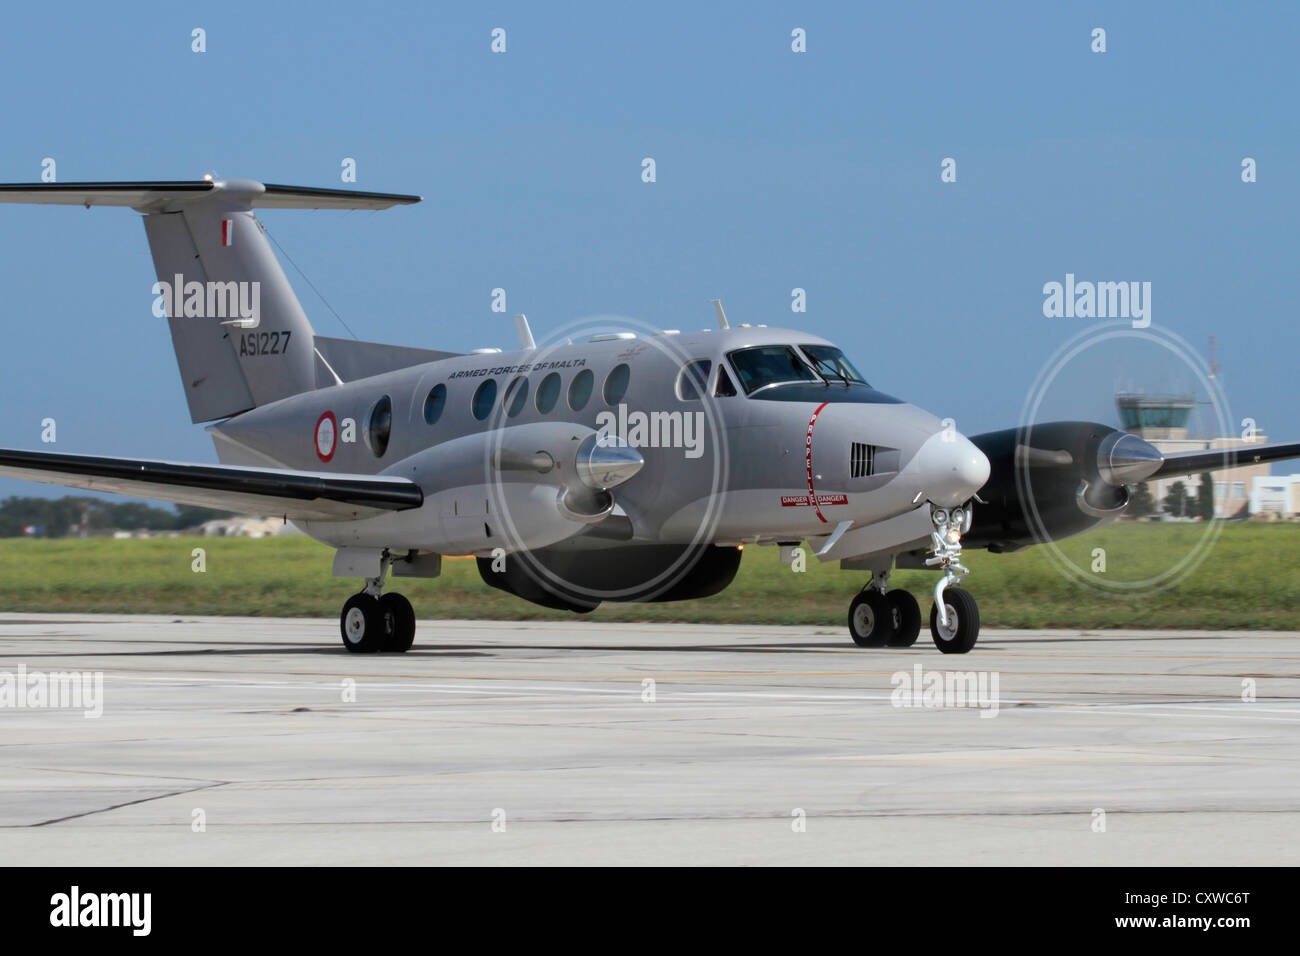 Beechcraft King Air twin-engine search and rescue propeller plane of the Armed Forces of Malta taxiing. Front view emphasising engines and prop blur. Stock Photo